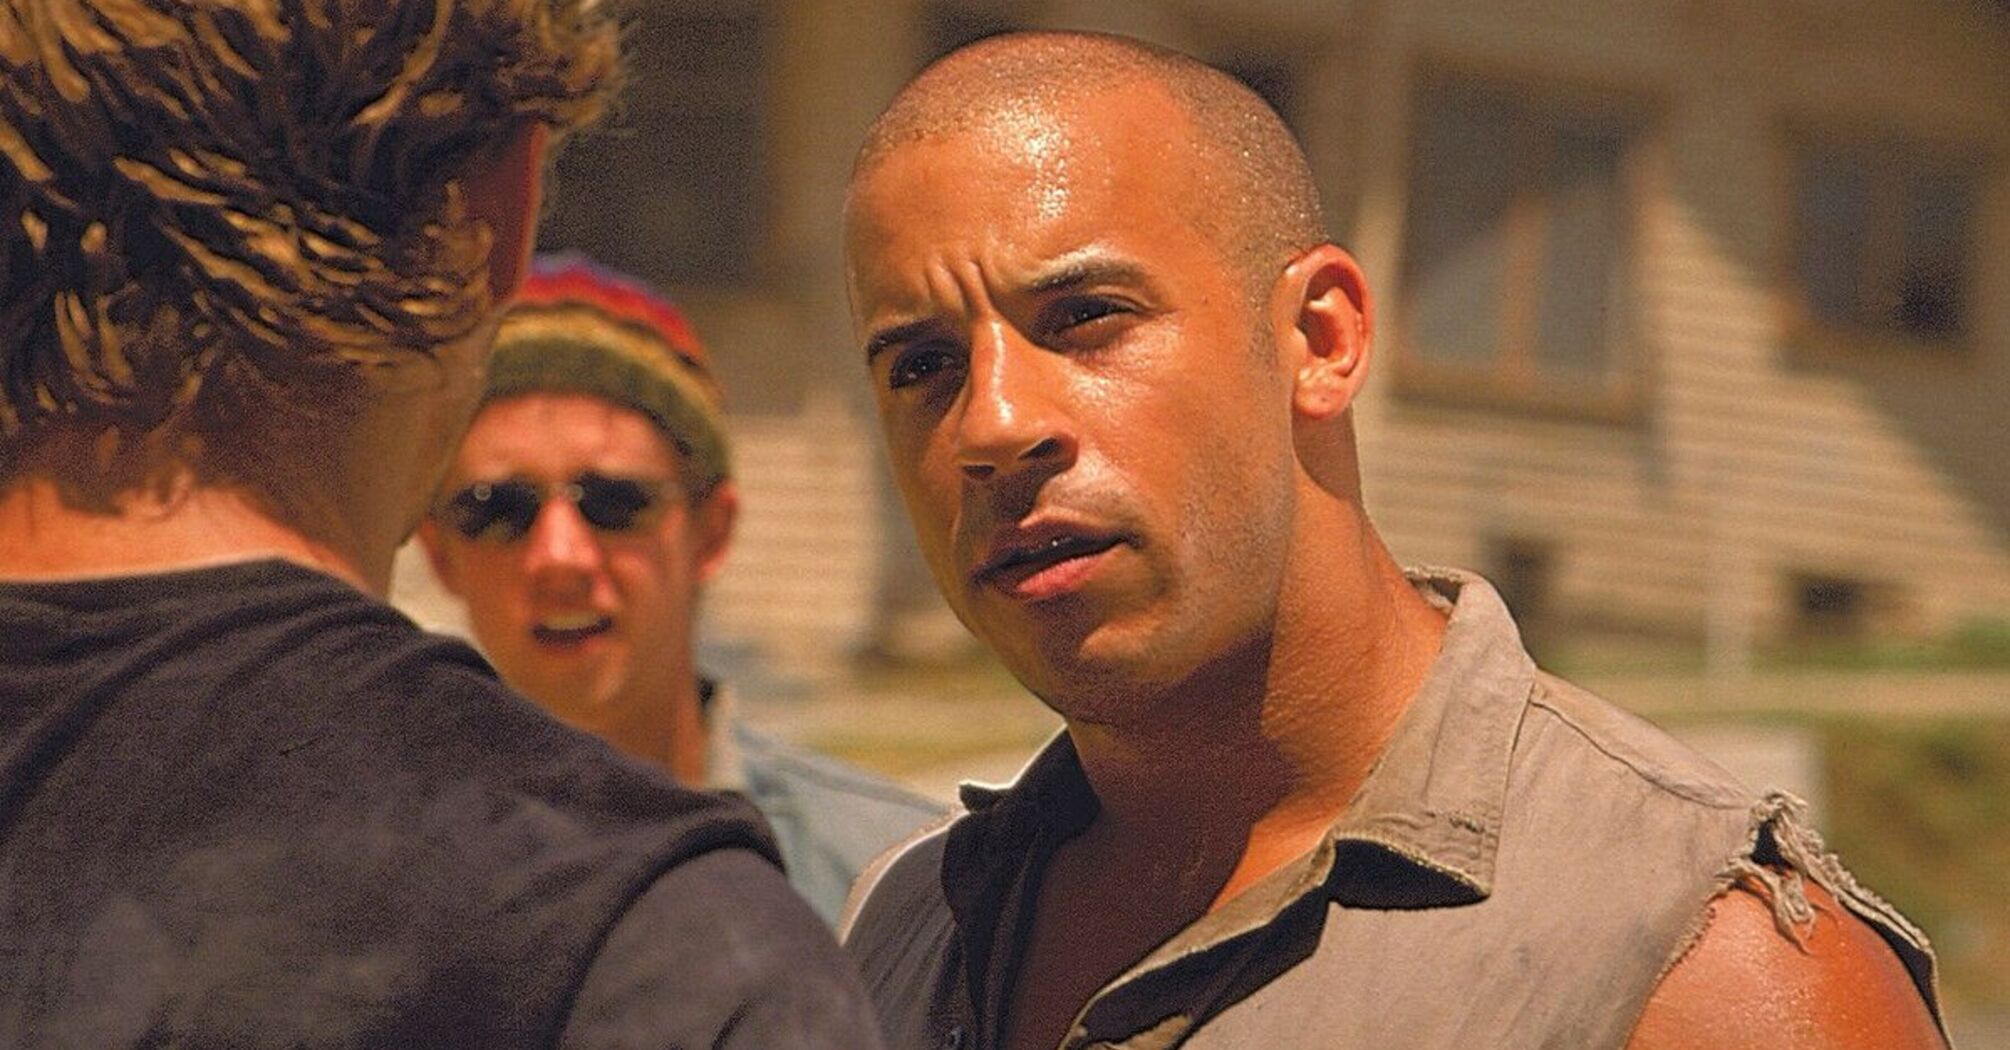 5 lesser-known facts about action star Vin Diesel